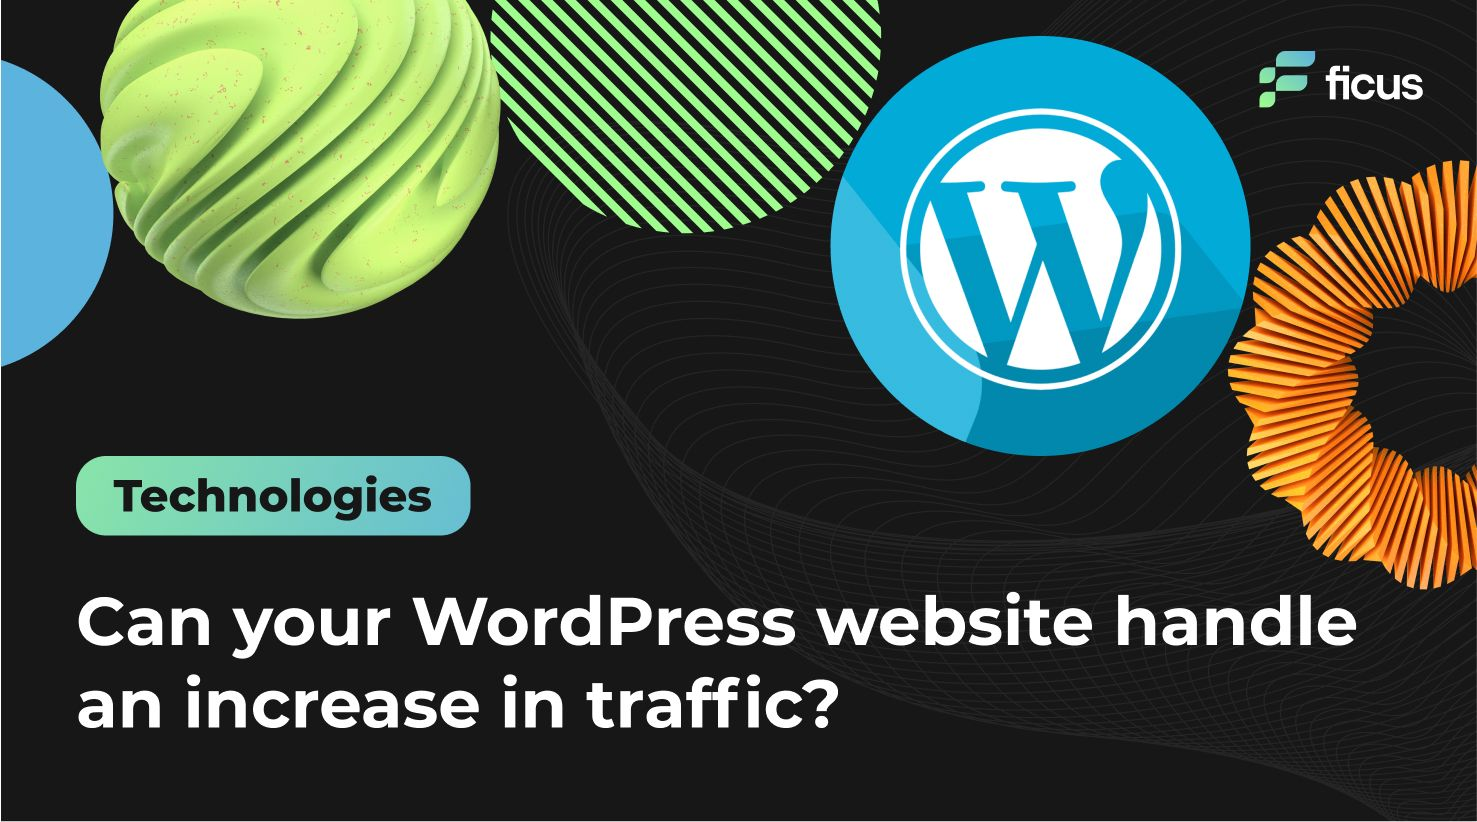 Can your WordPress website handle an increase in traffic?